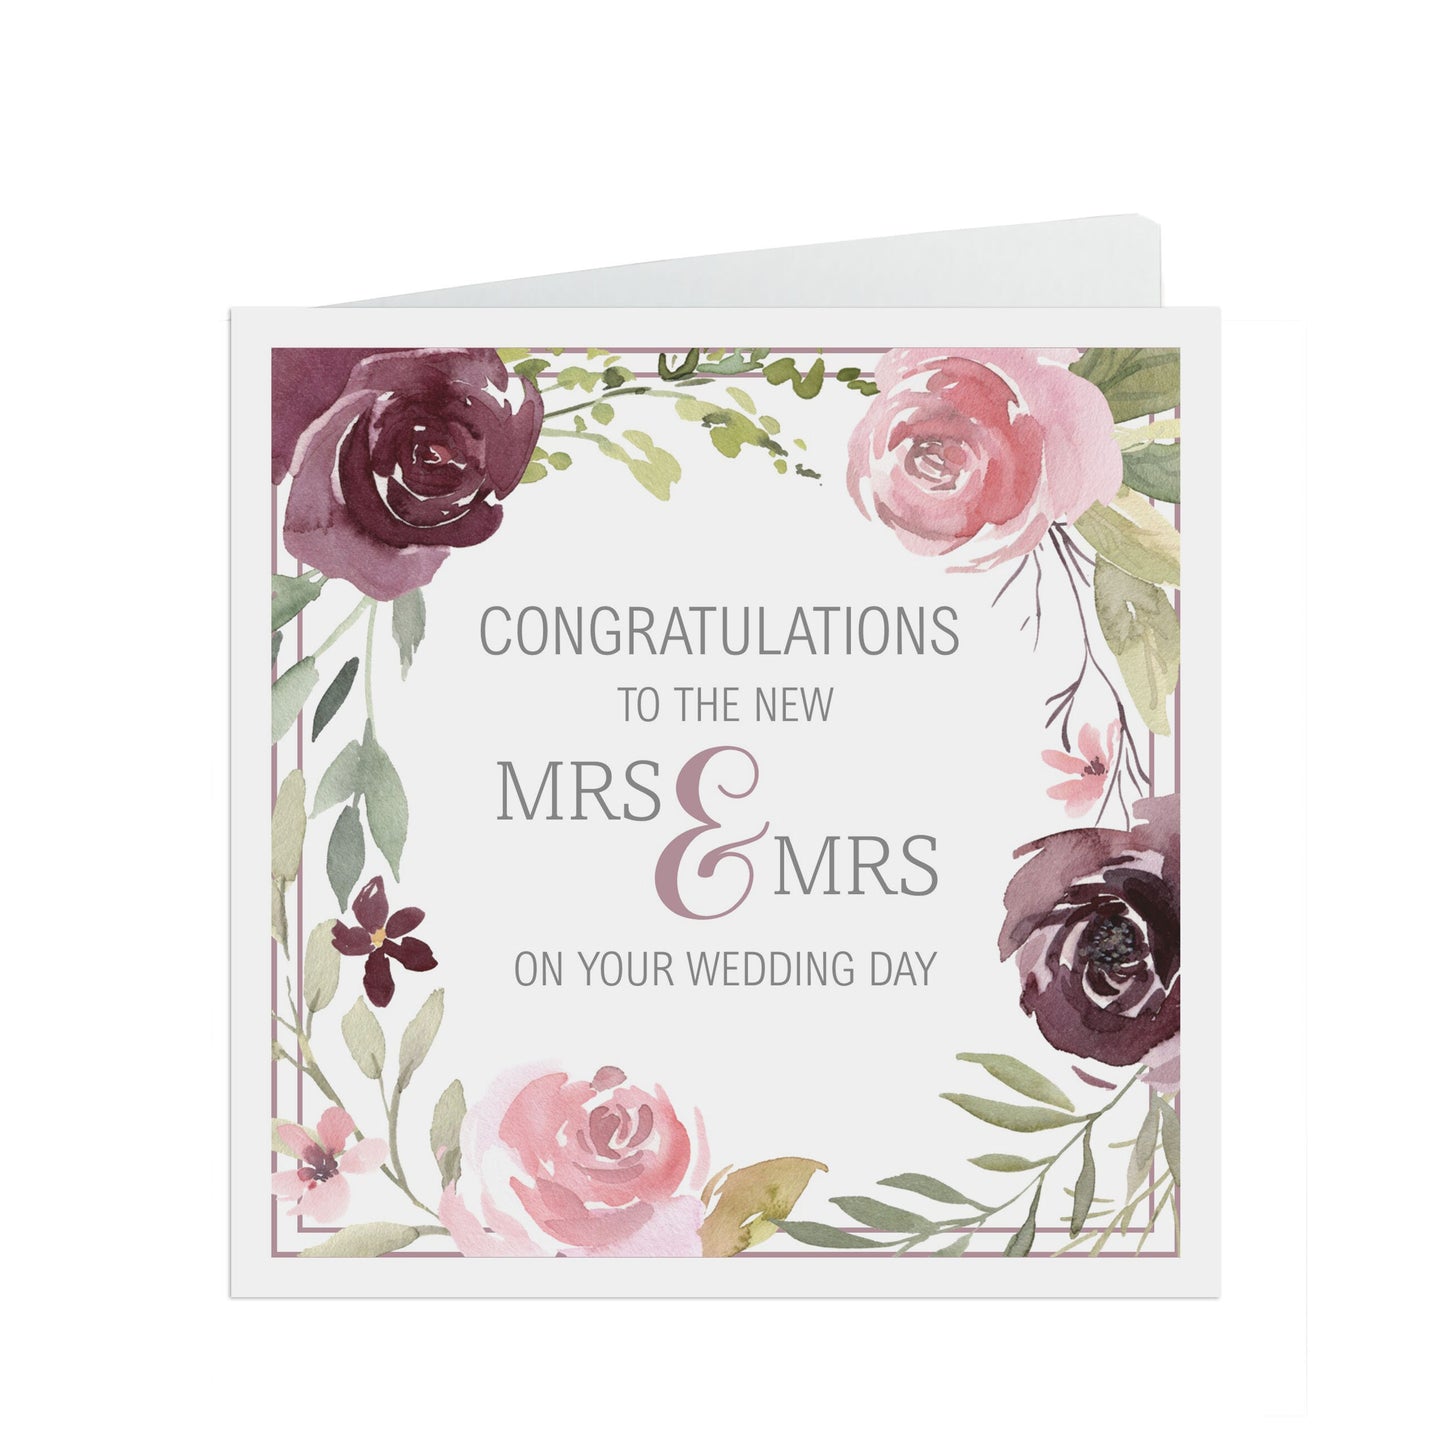 Purple & Mauve Floral Wedding Day Card - Congratulations To The New Mrs and Mrs On Your Wedding Day - Same Sex Wedding